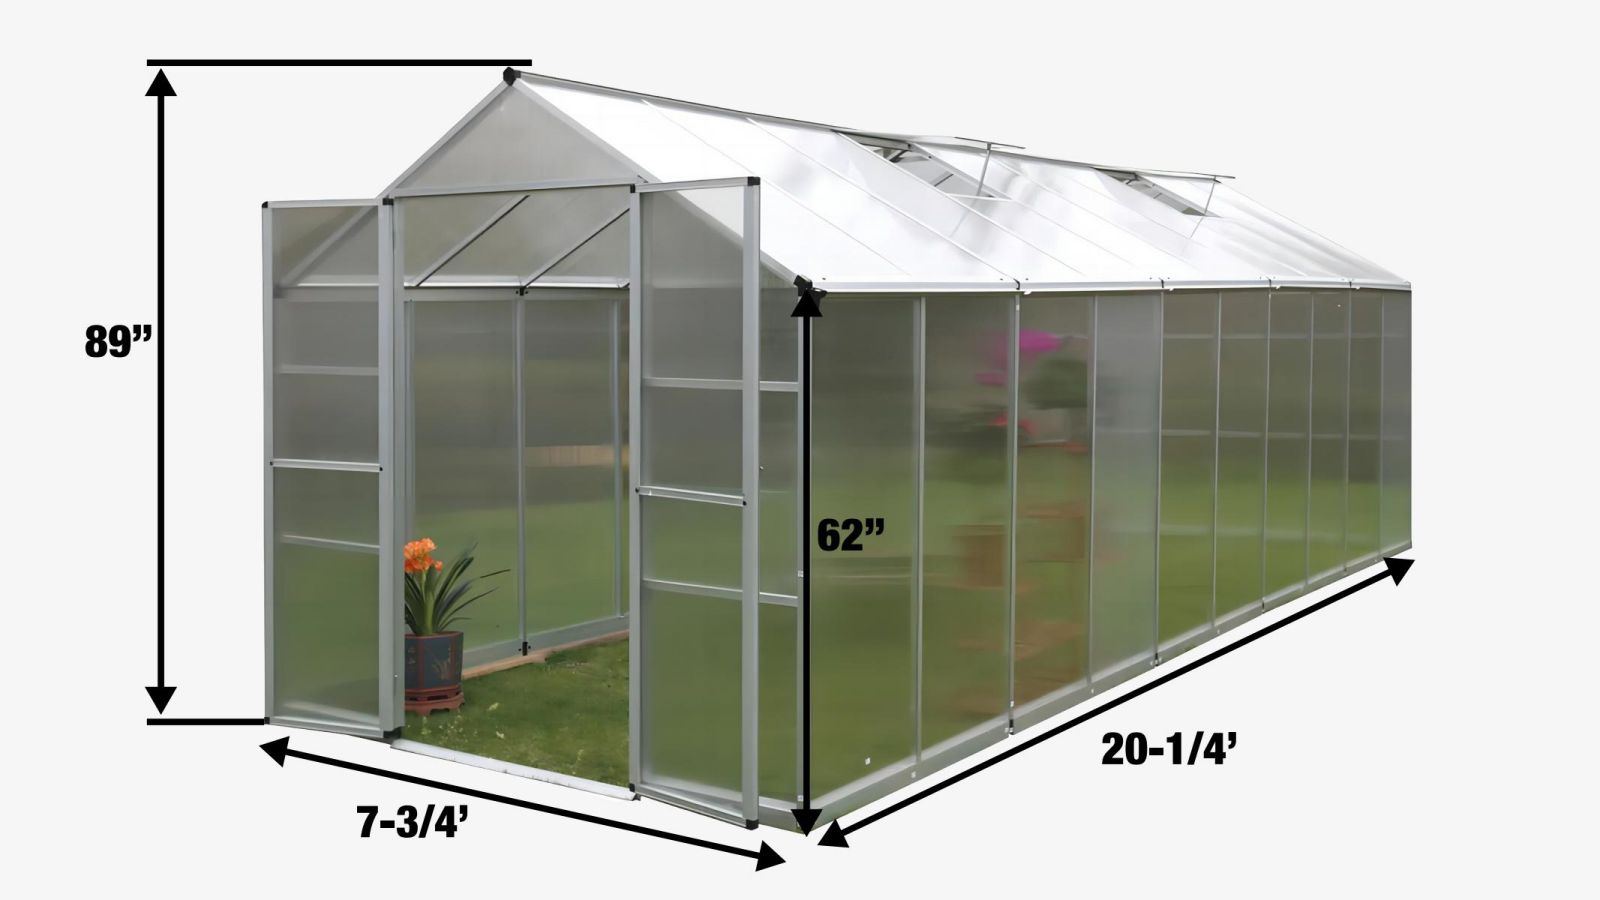 TMG Industrial 8' x 20' Aluminum Frame Greenhouse w/4 mm Twin Wall Polycarbonate Panels, UV Protected Panels, TMG-GH820-specifications-image